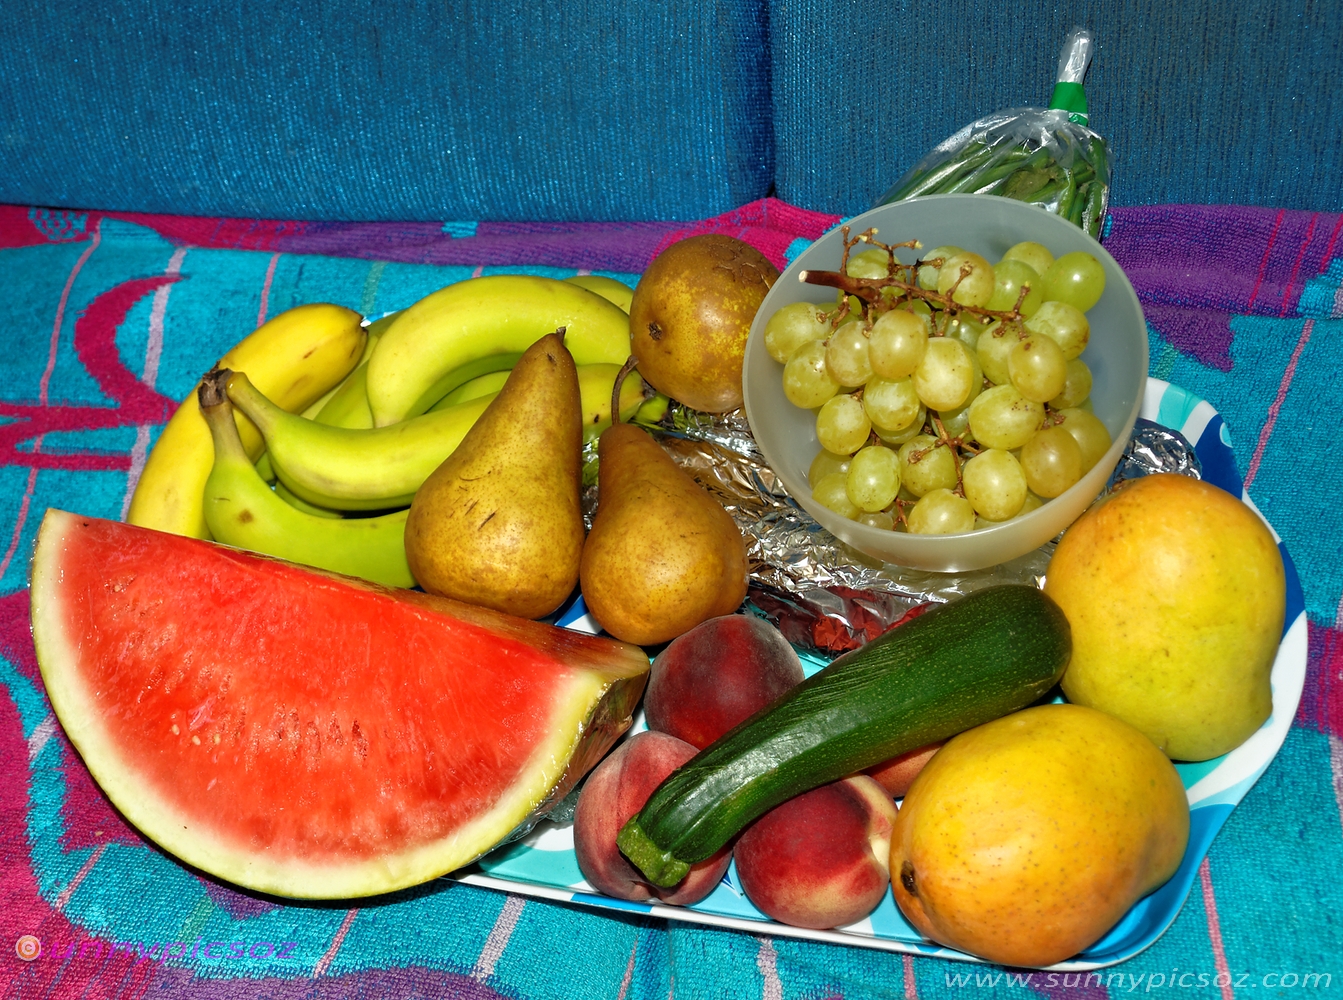 Colourful Tray Of Fruit.